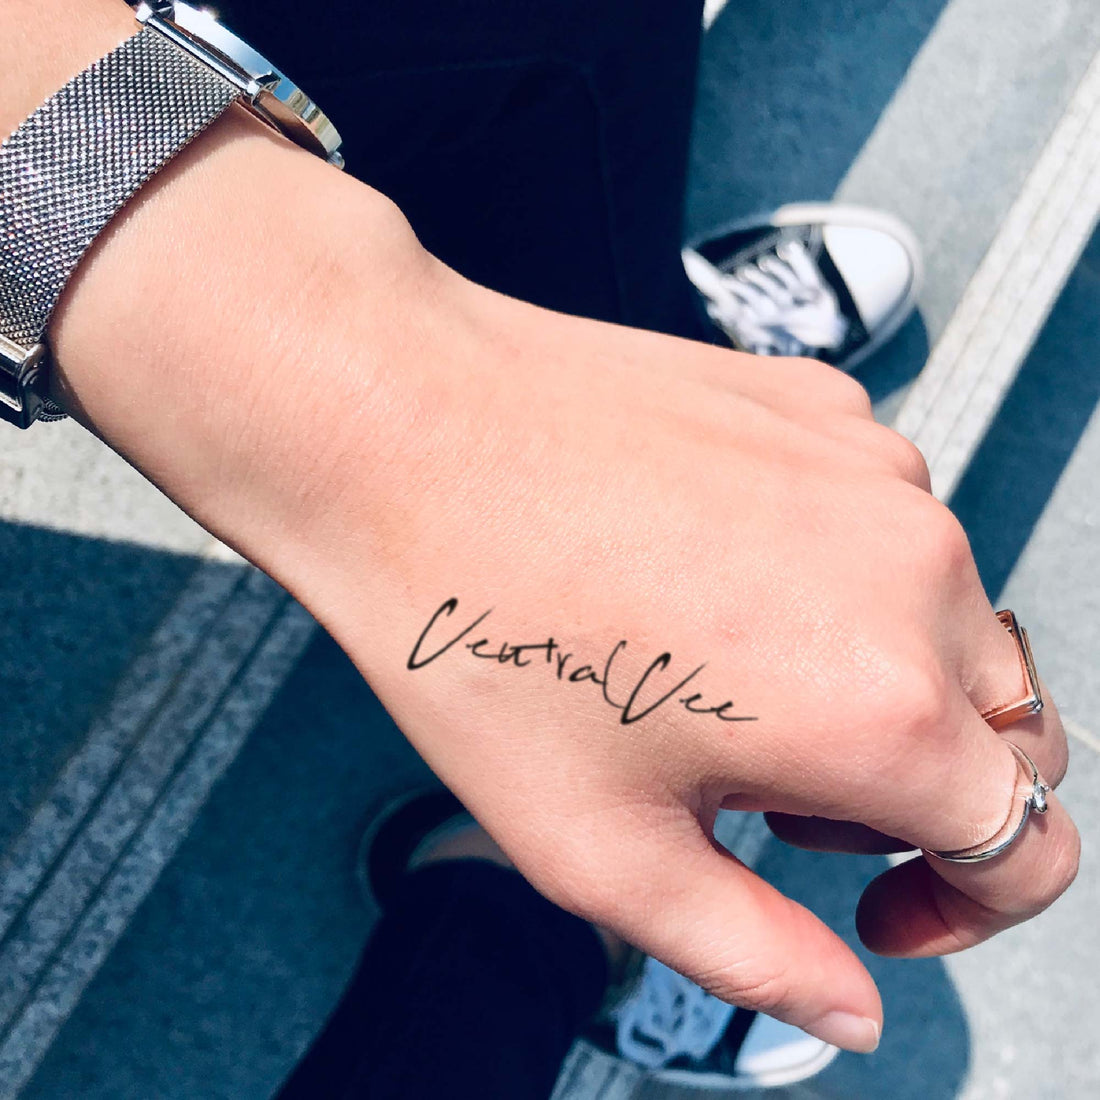 Central Cee custom temporary tattoo sticker design idea inspiration meanings removal arm wrist hand words font name signature calligraphy lyrics tour concert outfits merch accessory gift souvenir costumes wear dress up code